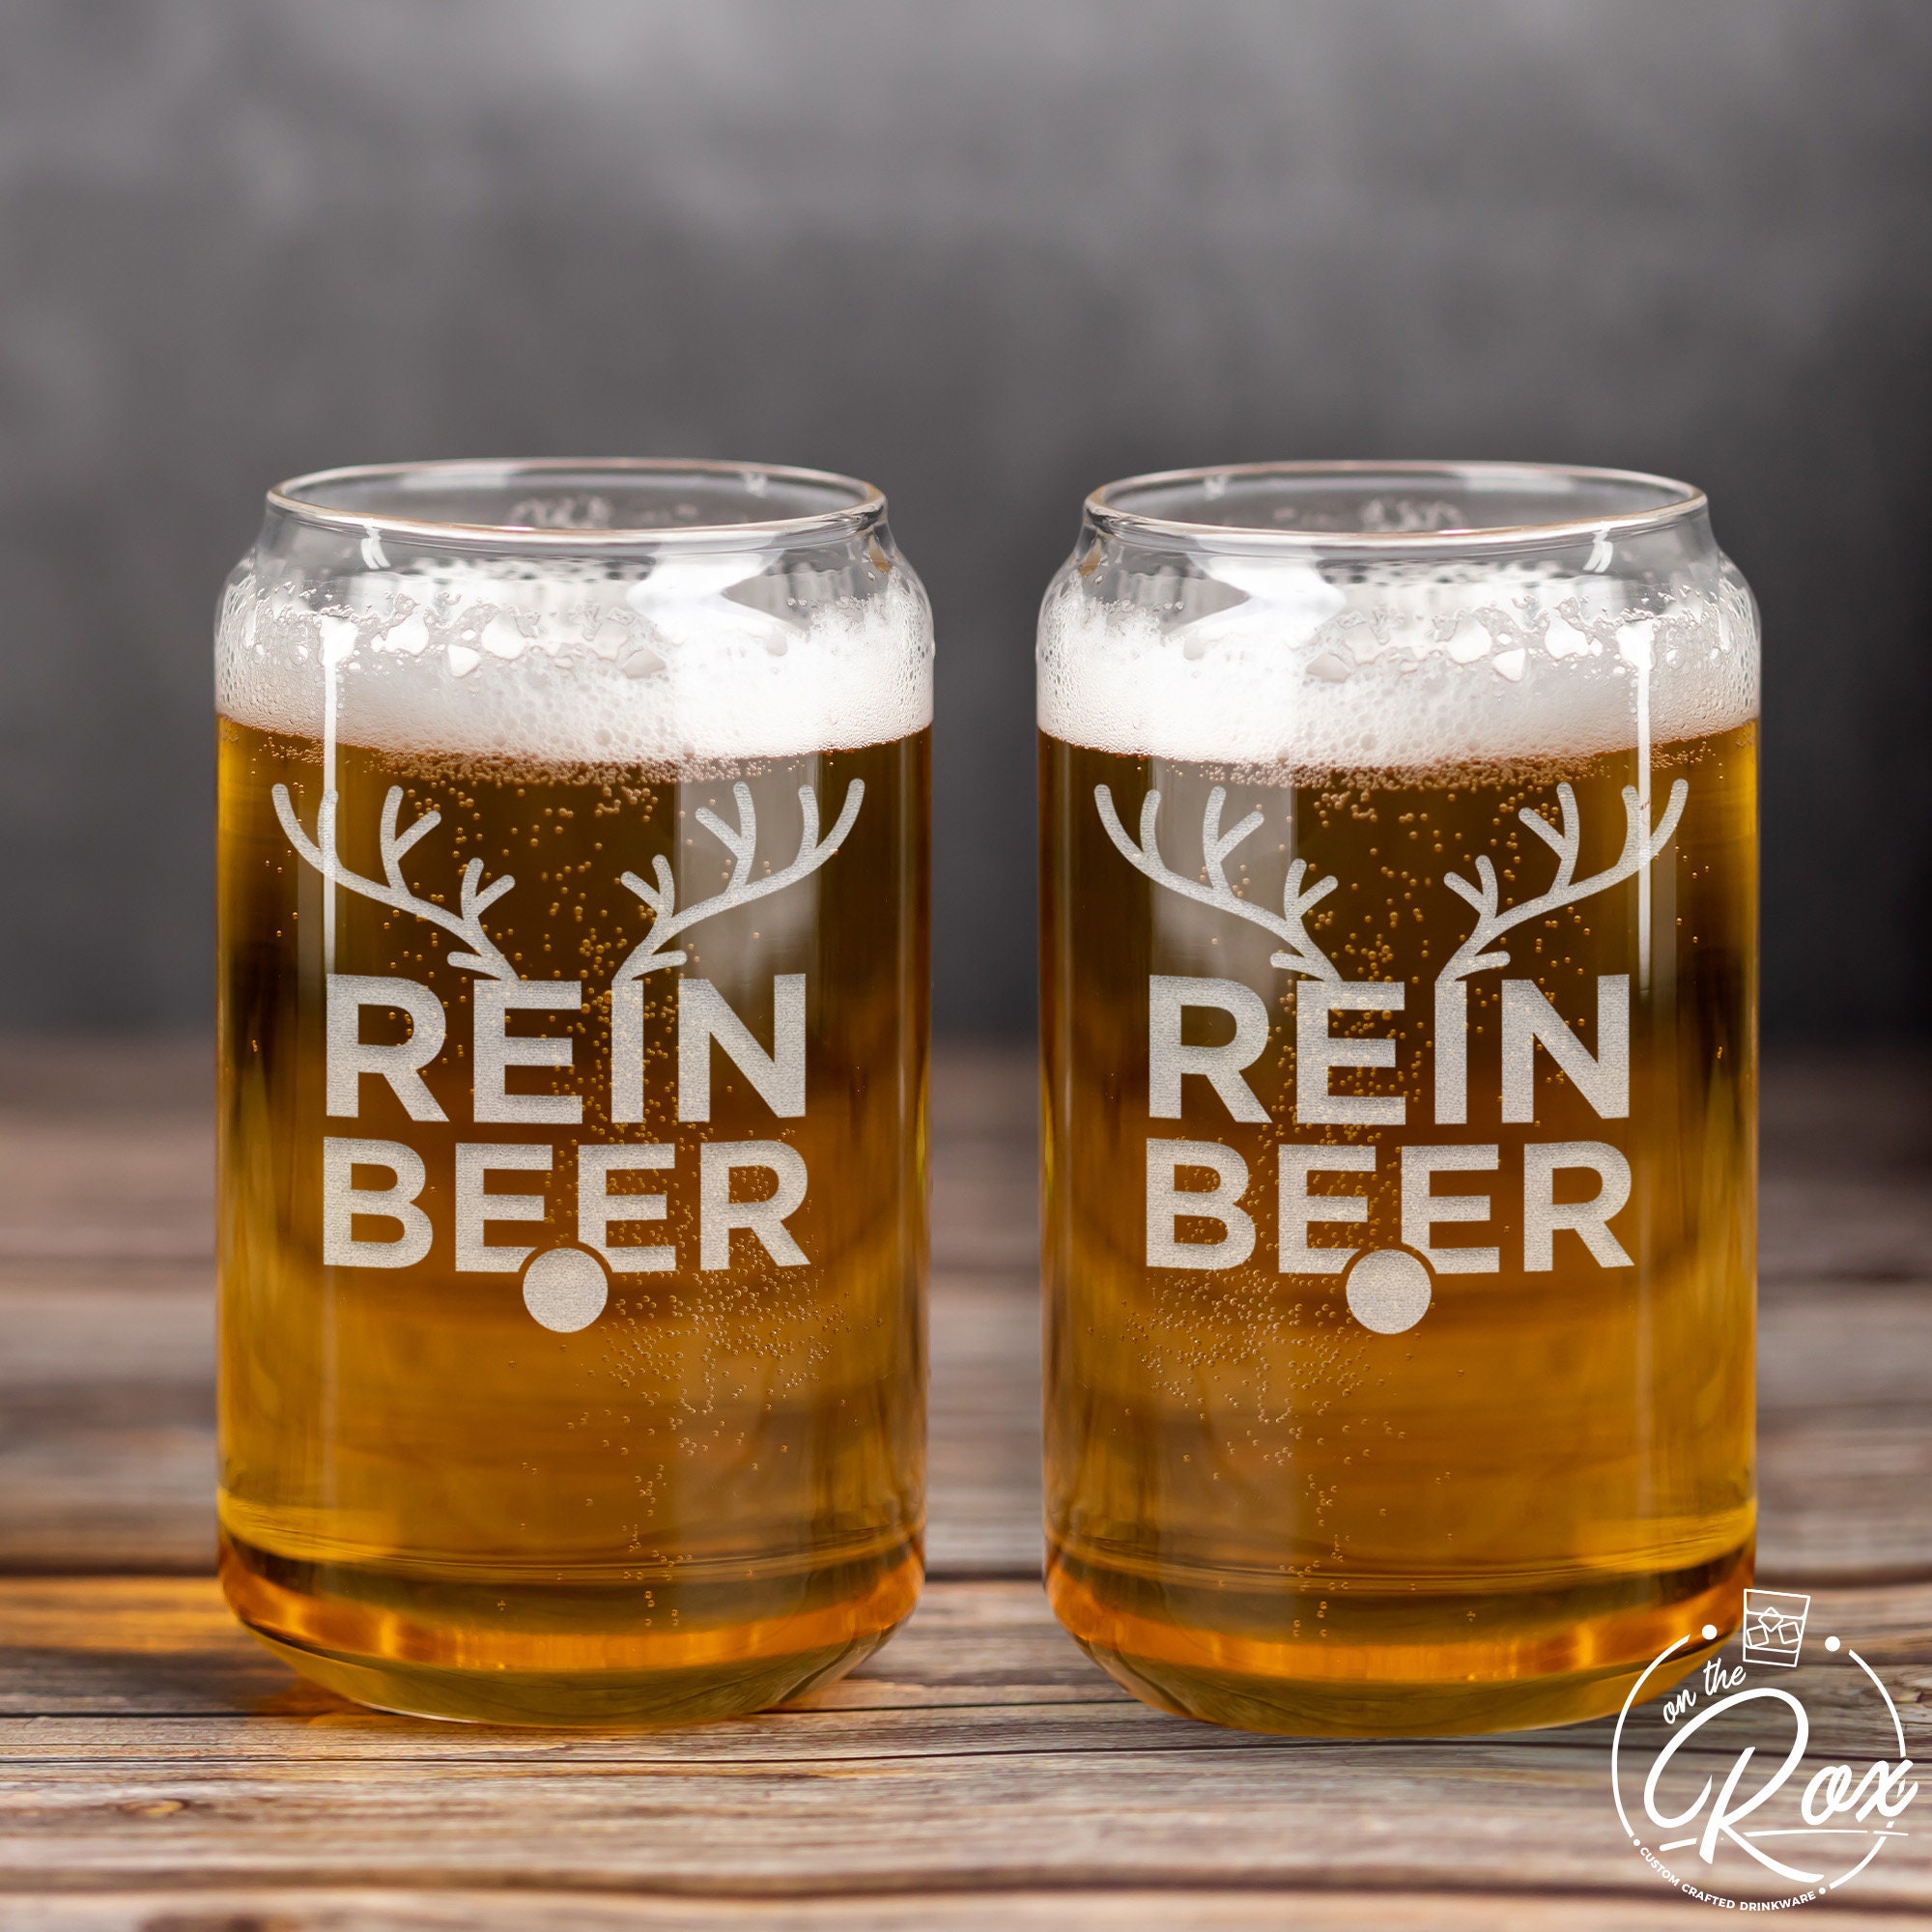 on The Rox Drinks Funny Christmas Beer Glasses - Reinbeer Holiday Beer Can Glass Set of 2 - Reindeer Holiday Gifts for Her - Christmas Drinking